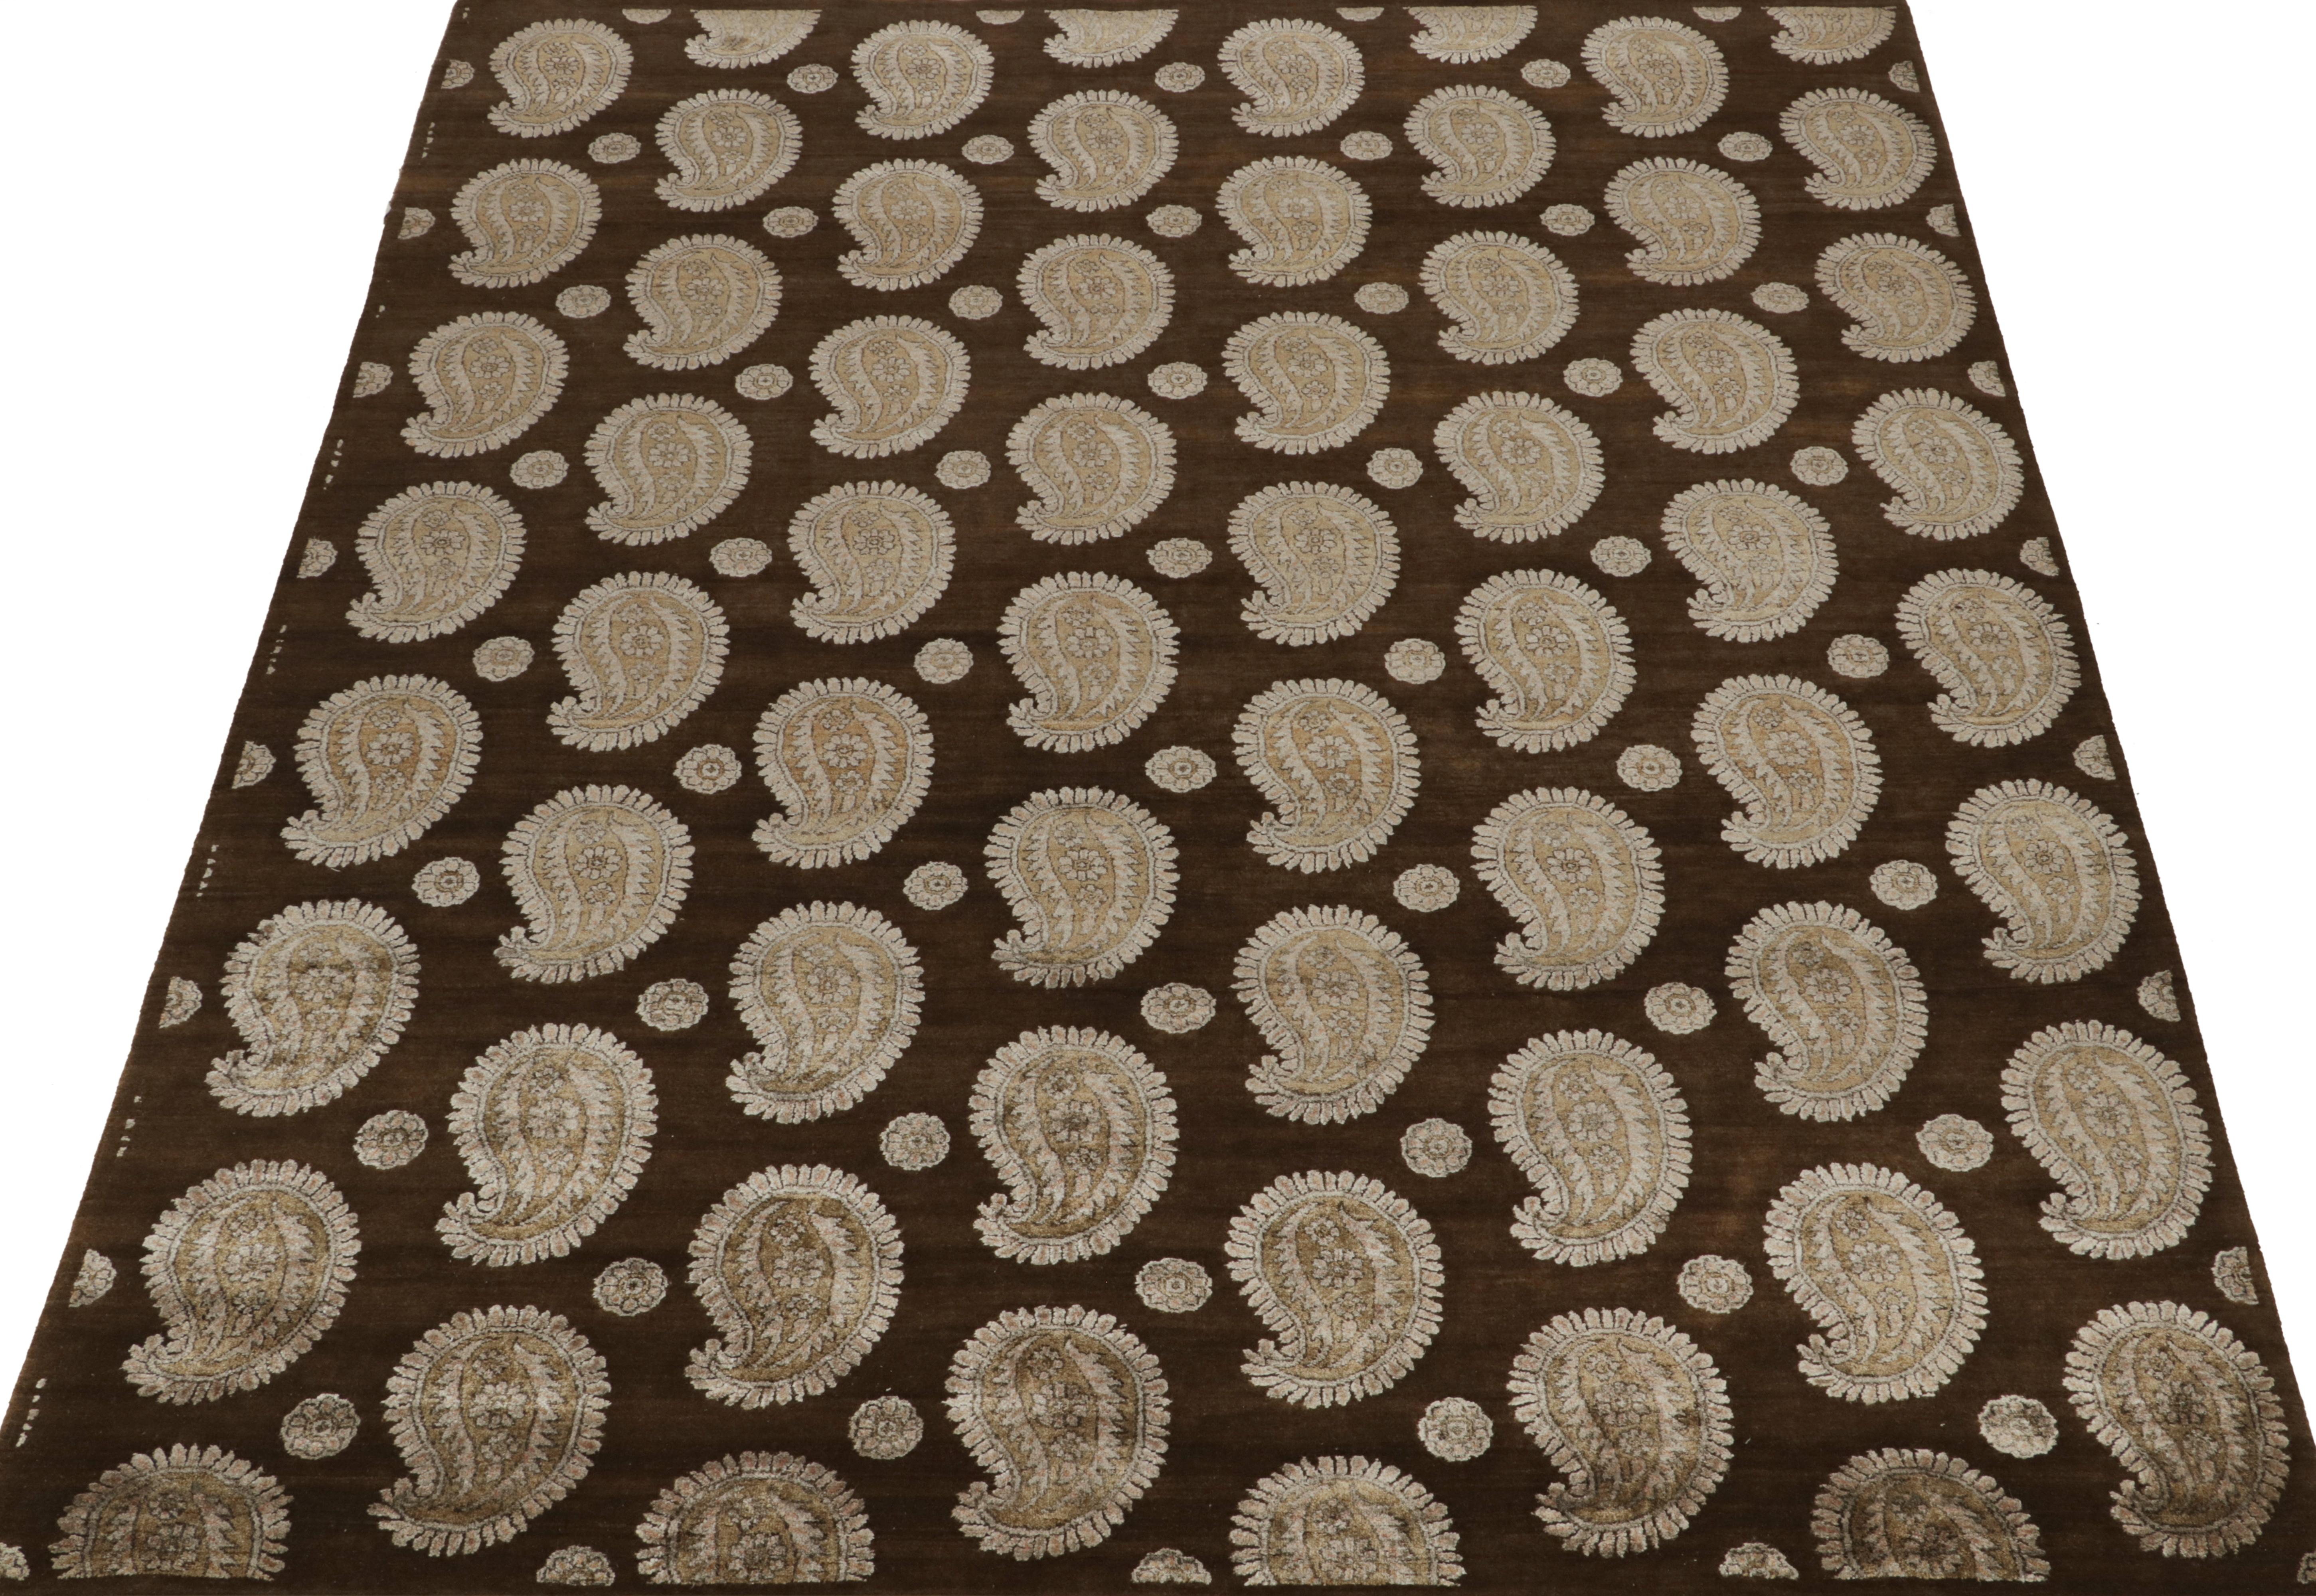 Indian Rug & Kilim’s Classic Style Rug in Brown with Ivory Paisley Patterns For Sale